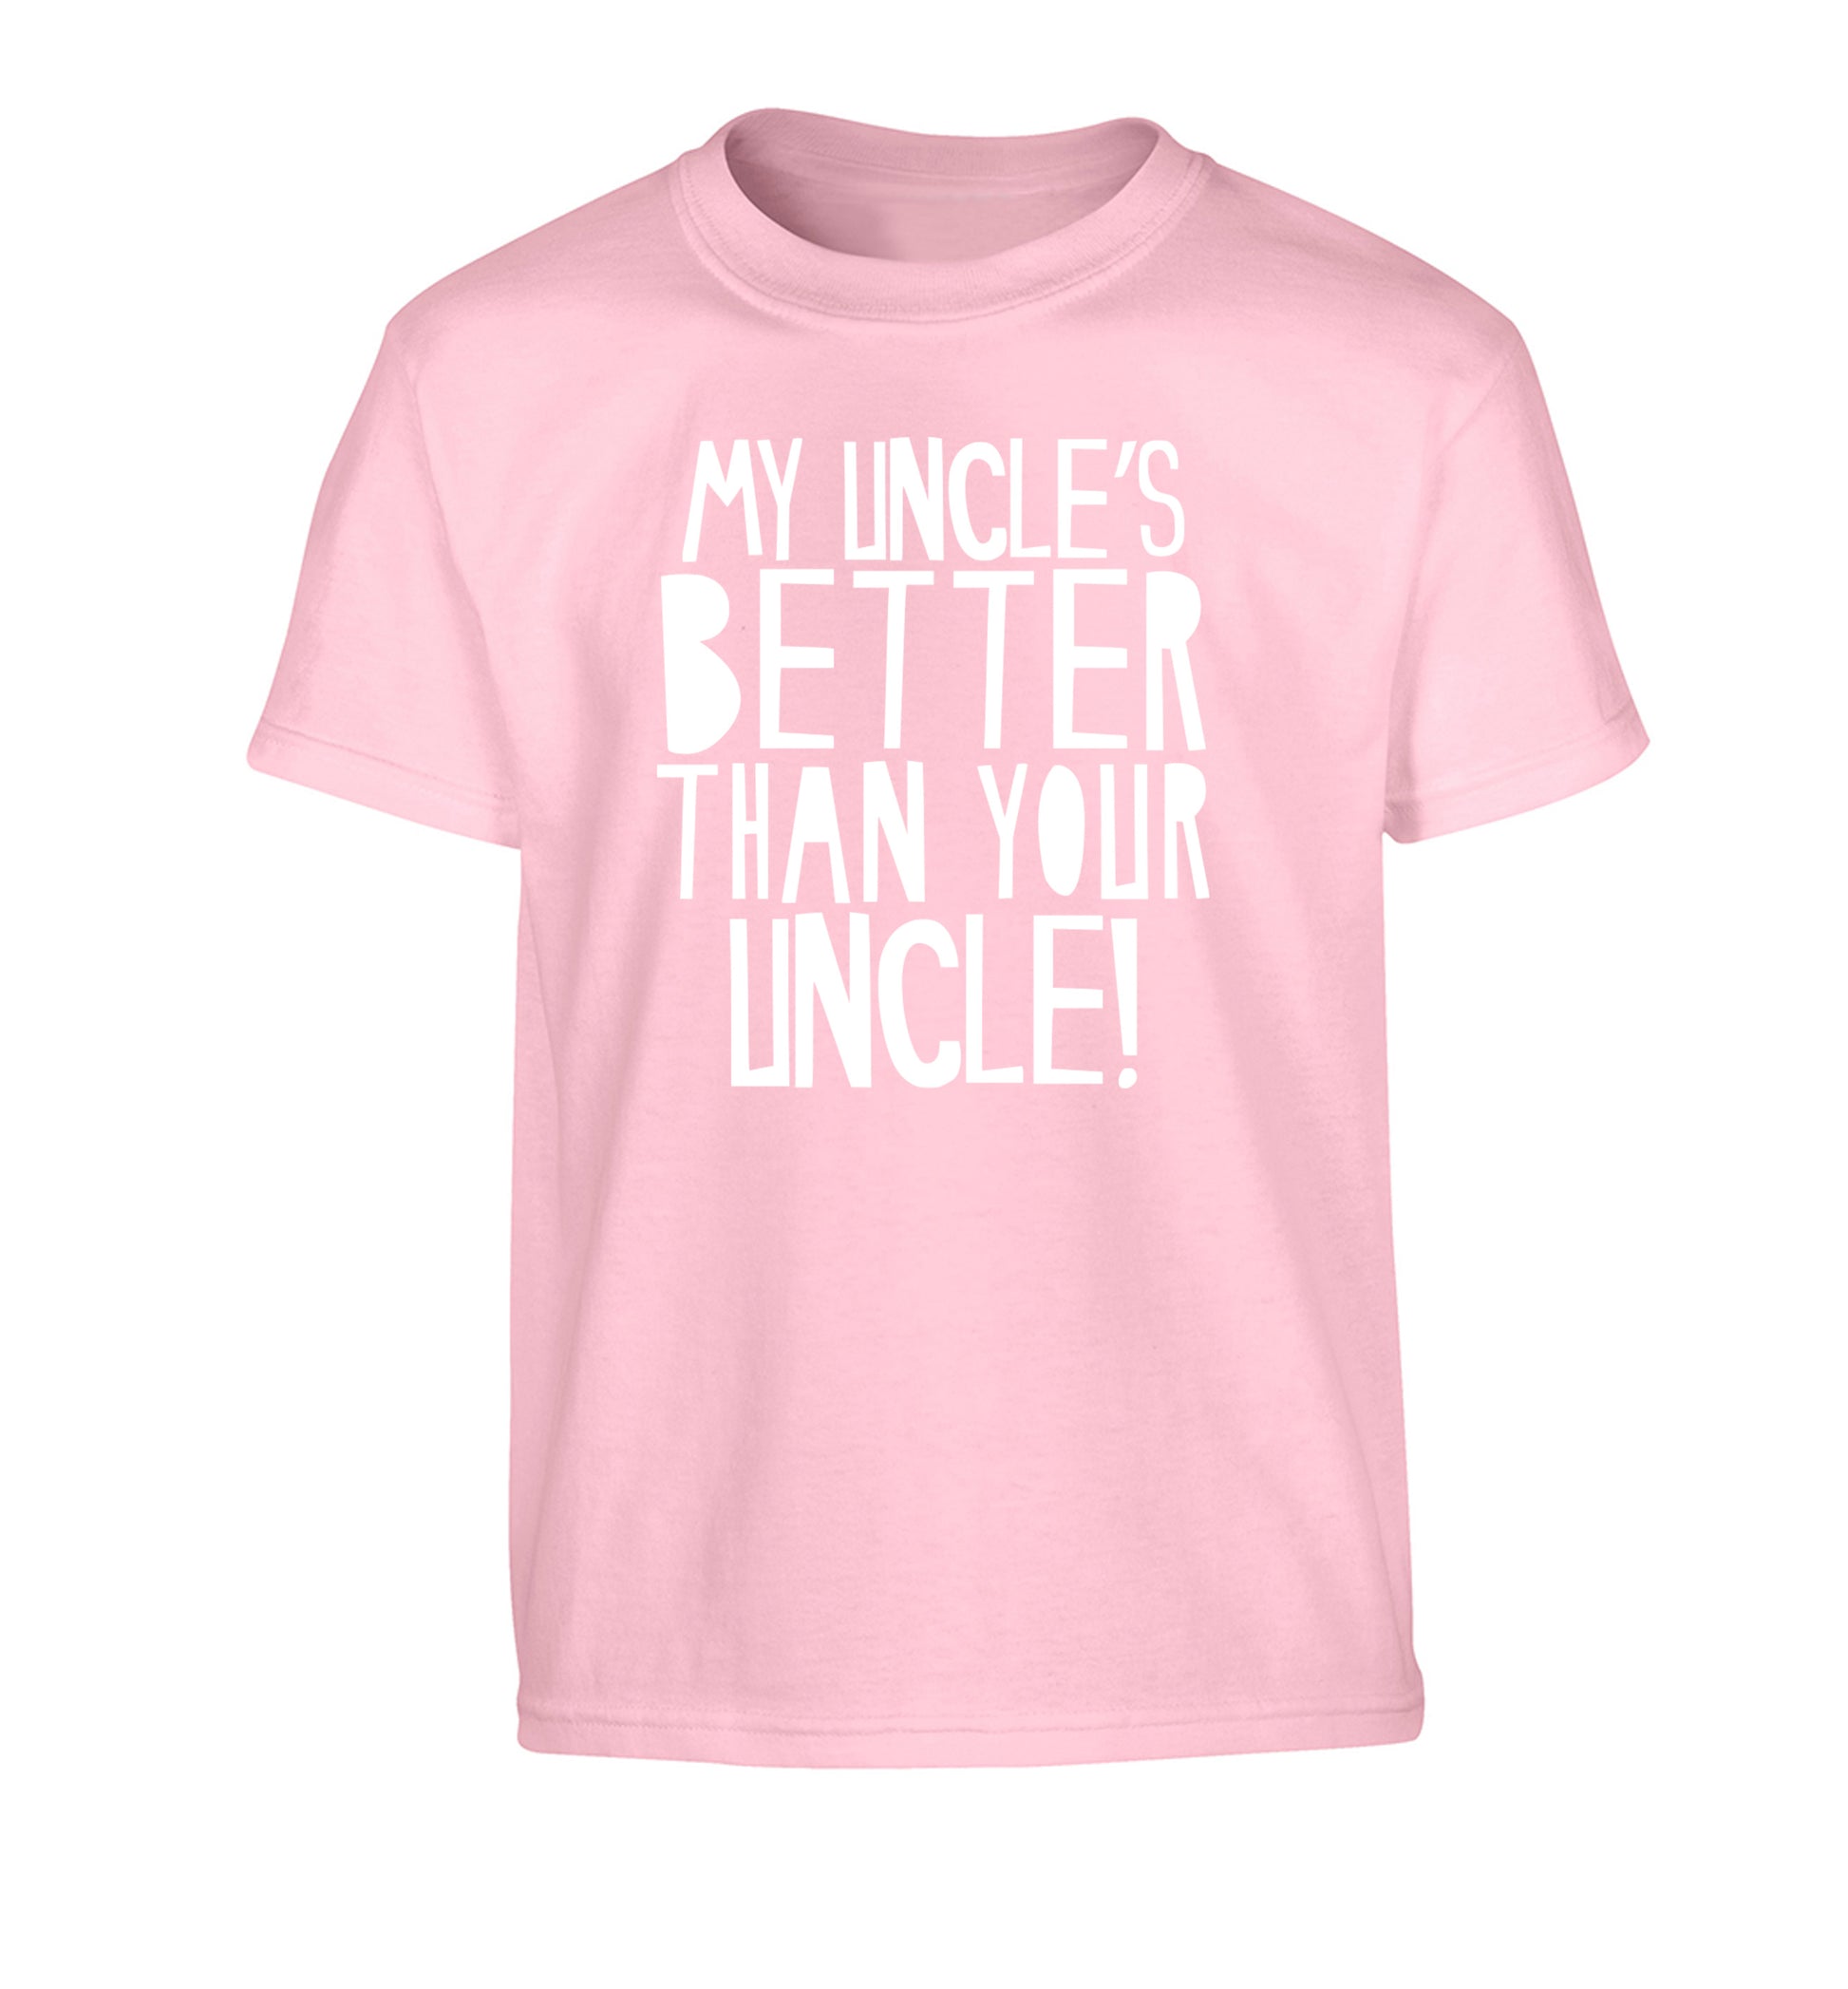 My uncles better than your uncle Children's light pink Tshirt 12-13 Years